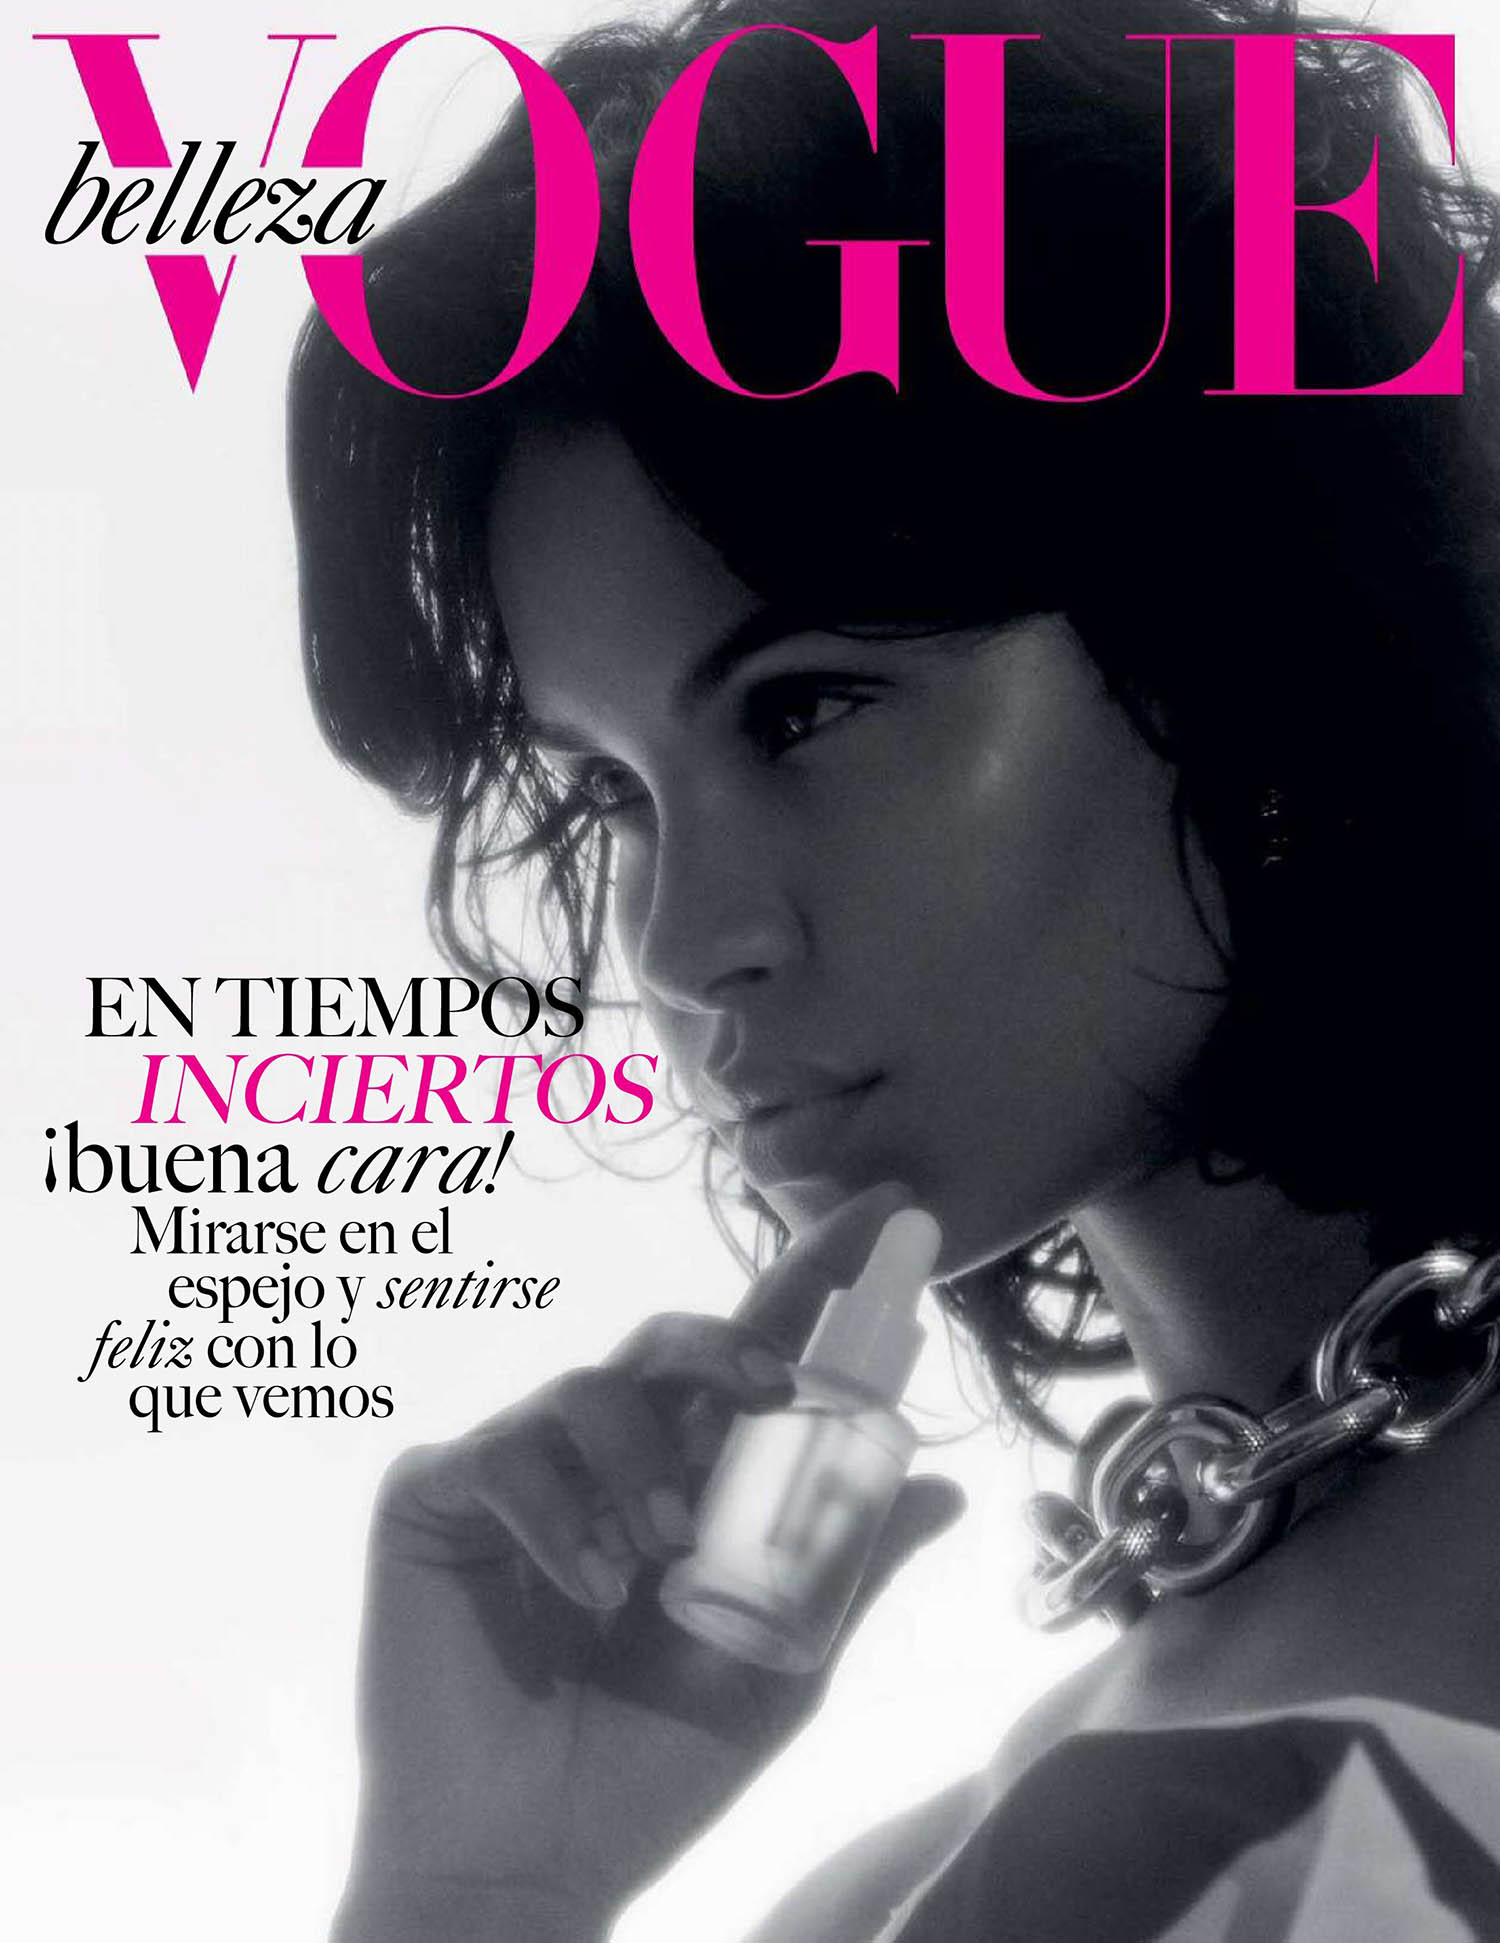 Daiane Sodré covers Vogue Belleza Mexico & Latin America April 2021 by Max Hoell